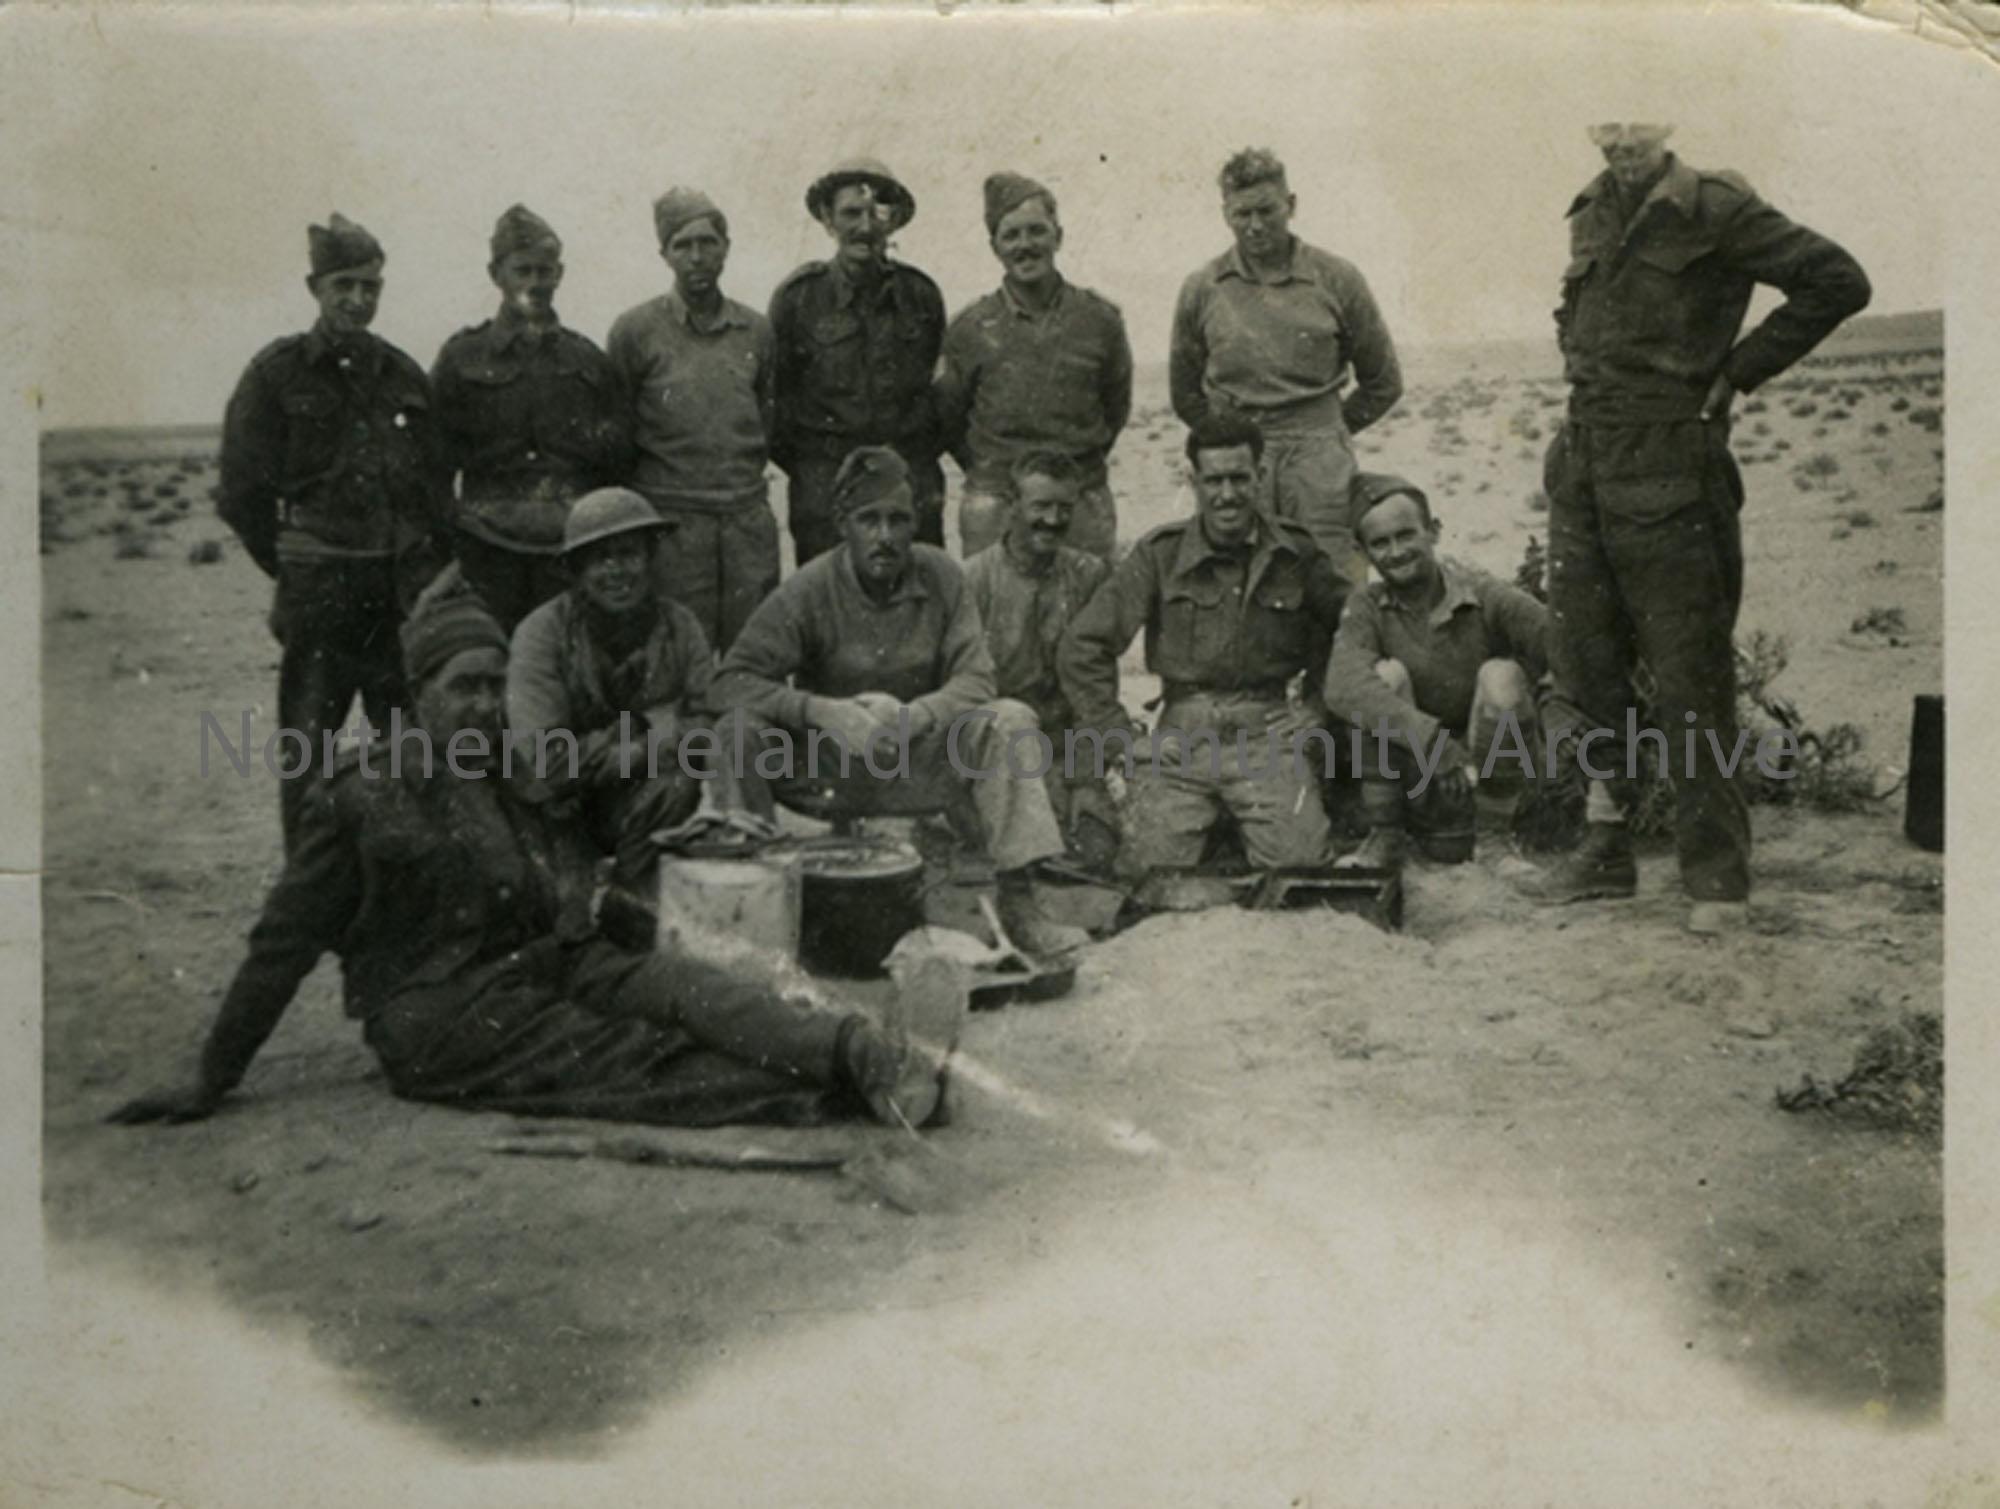 Group of 13 soldiers in desert